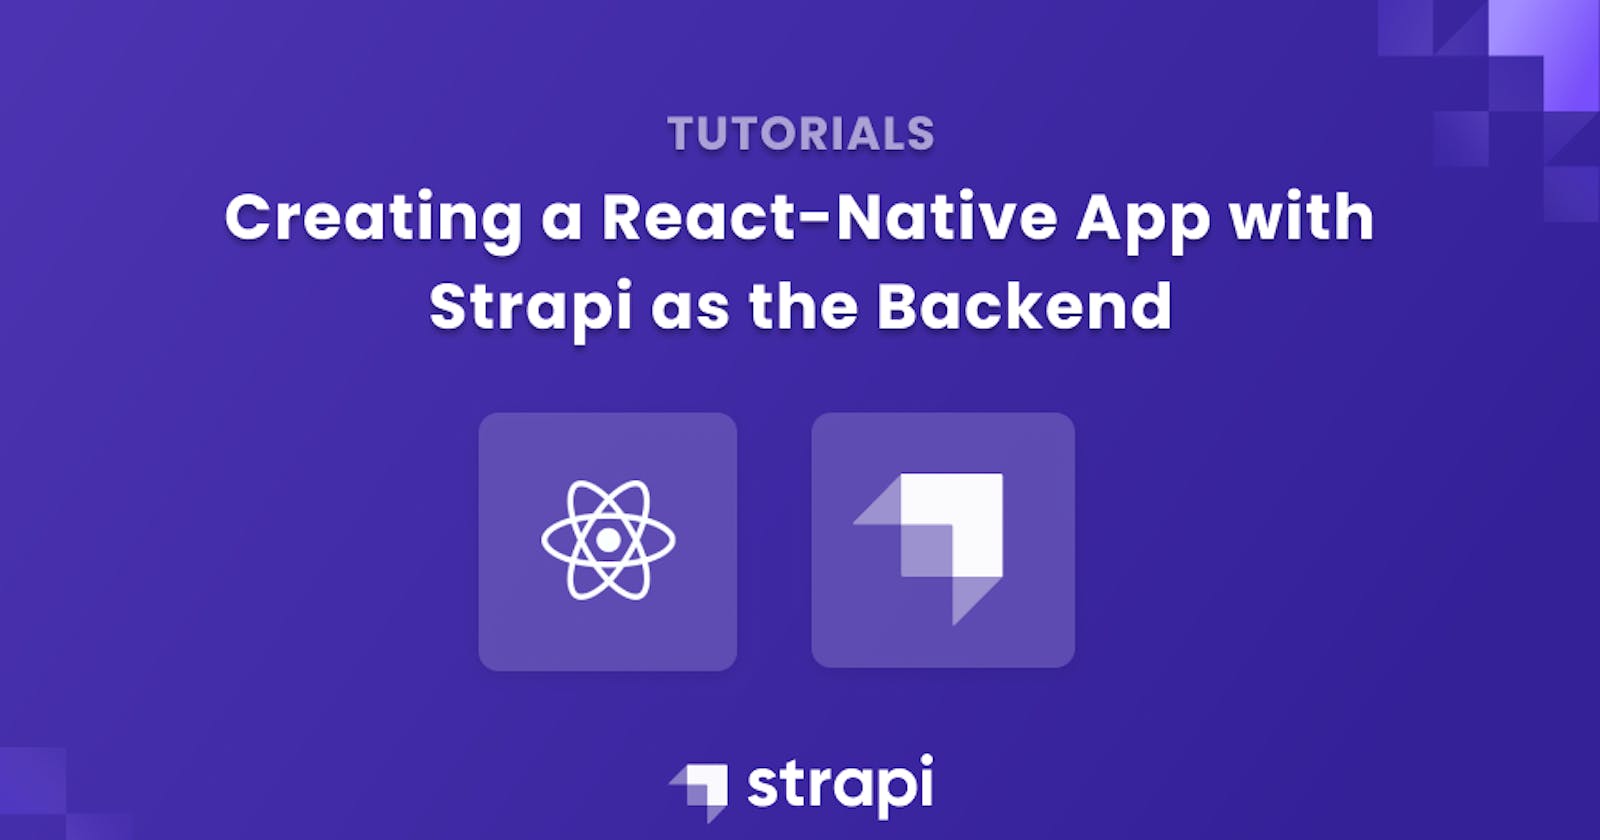 Creating a React-Native App with Strapi as the Backend